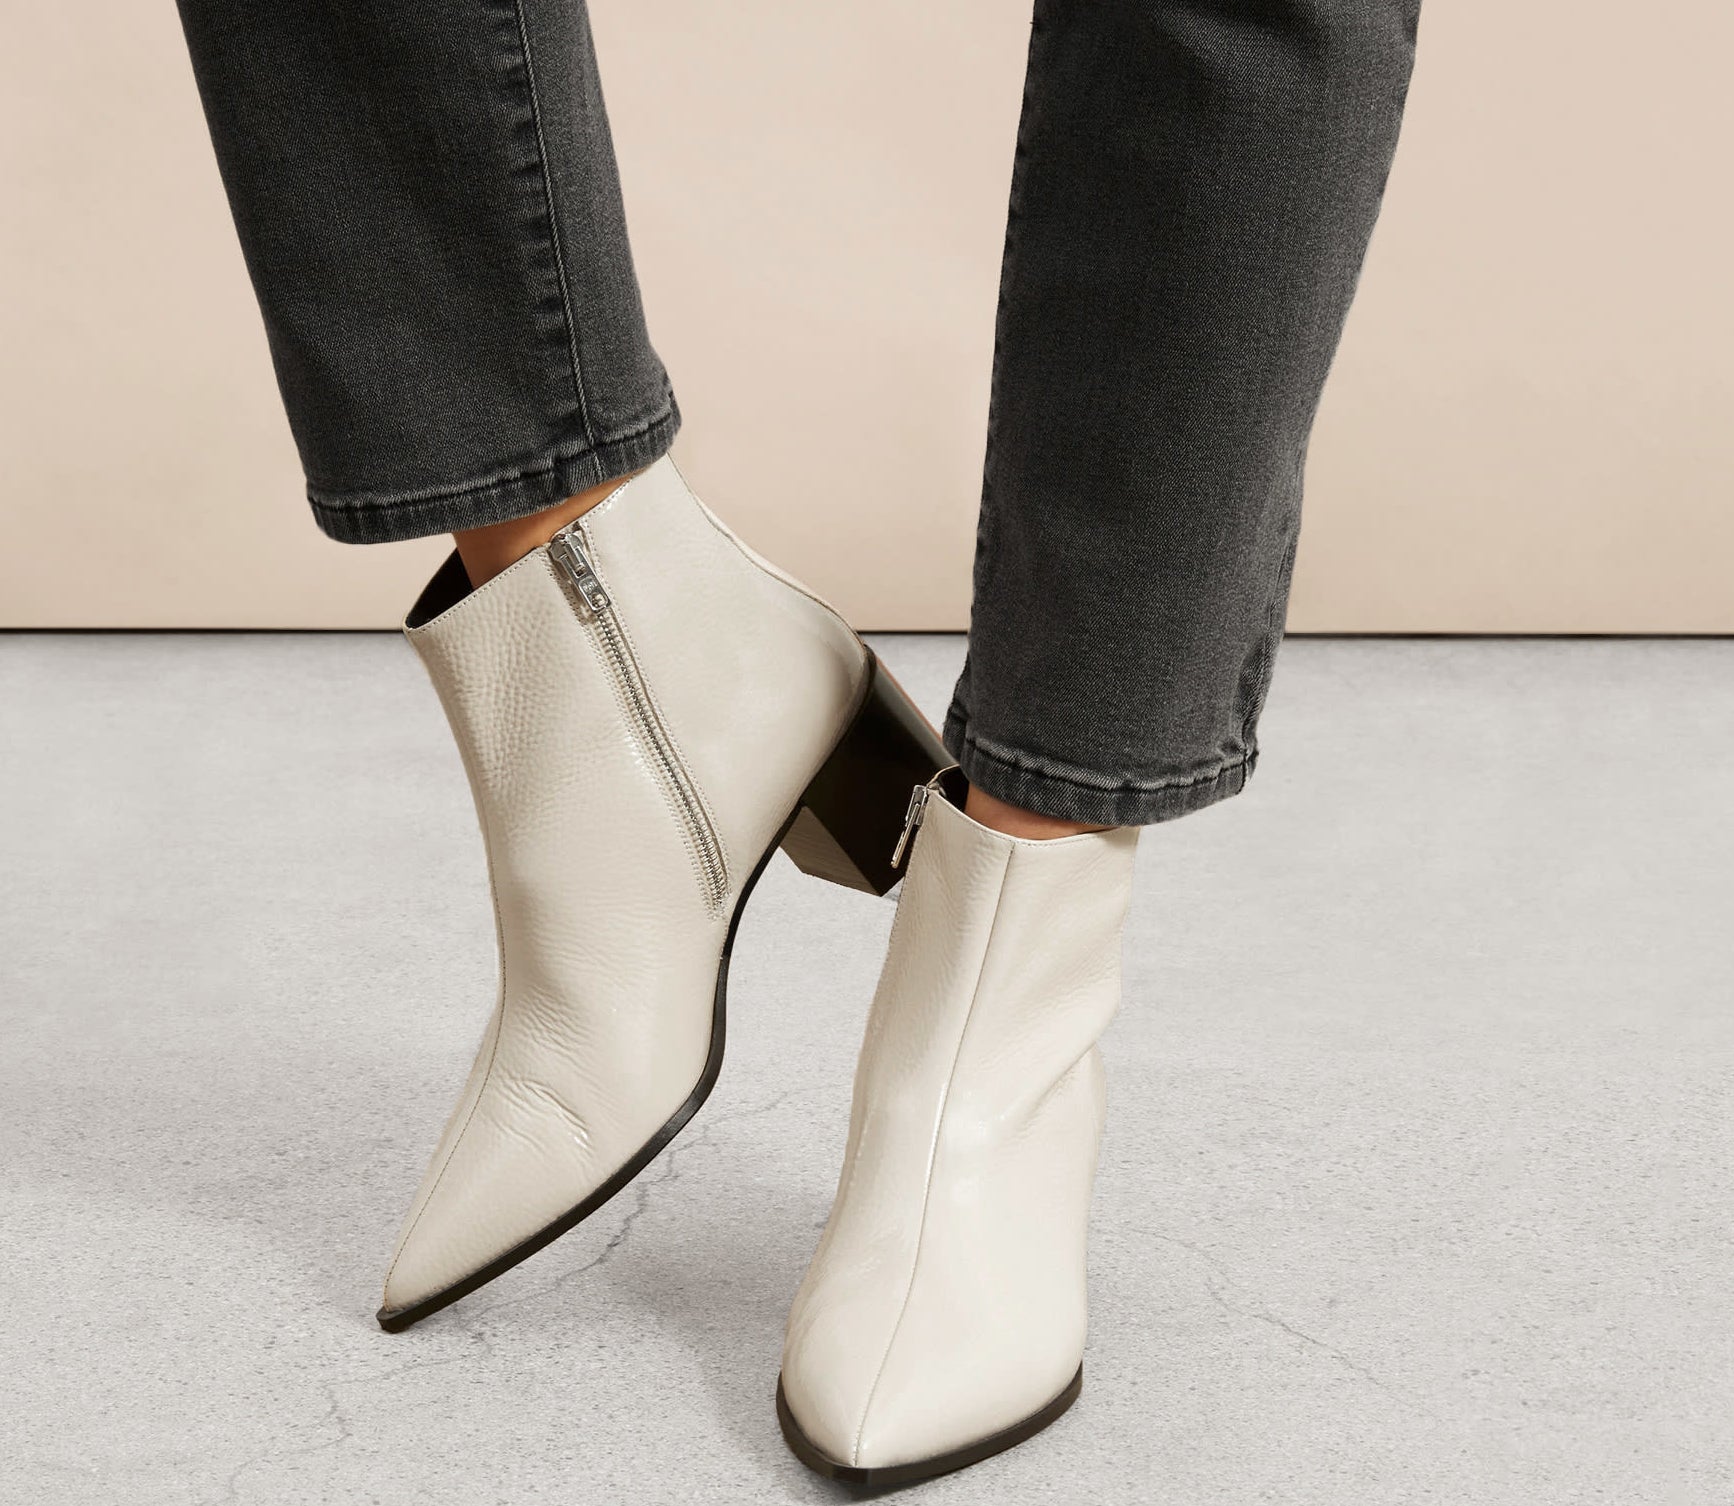 35 Gorgeous Boots You'll Want To Wear All Year Long